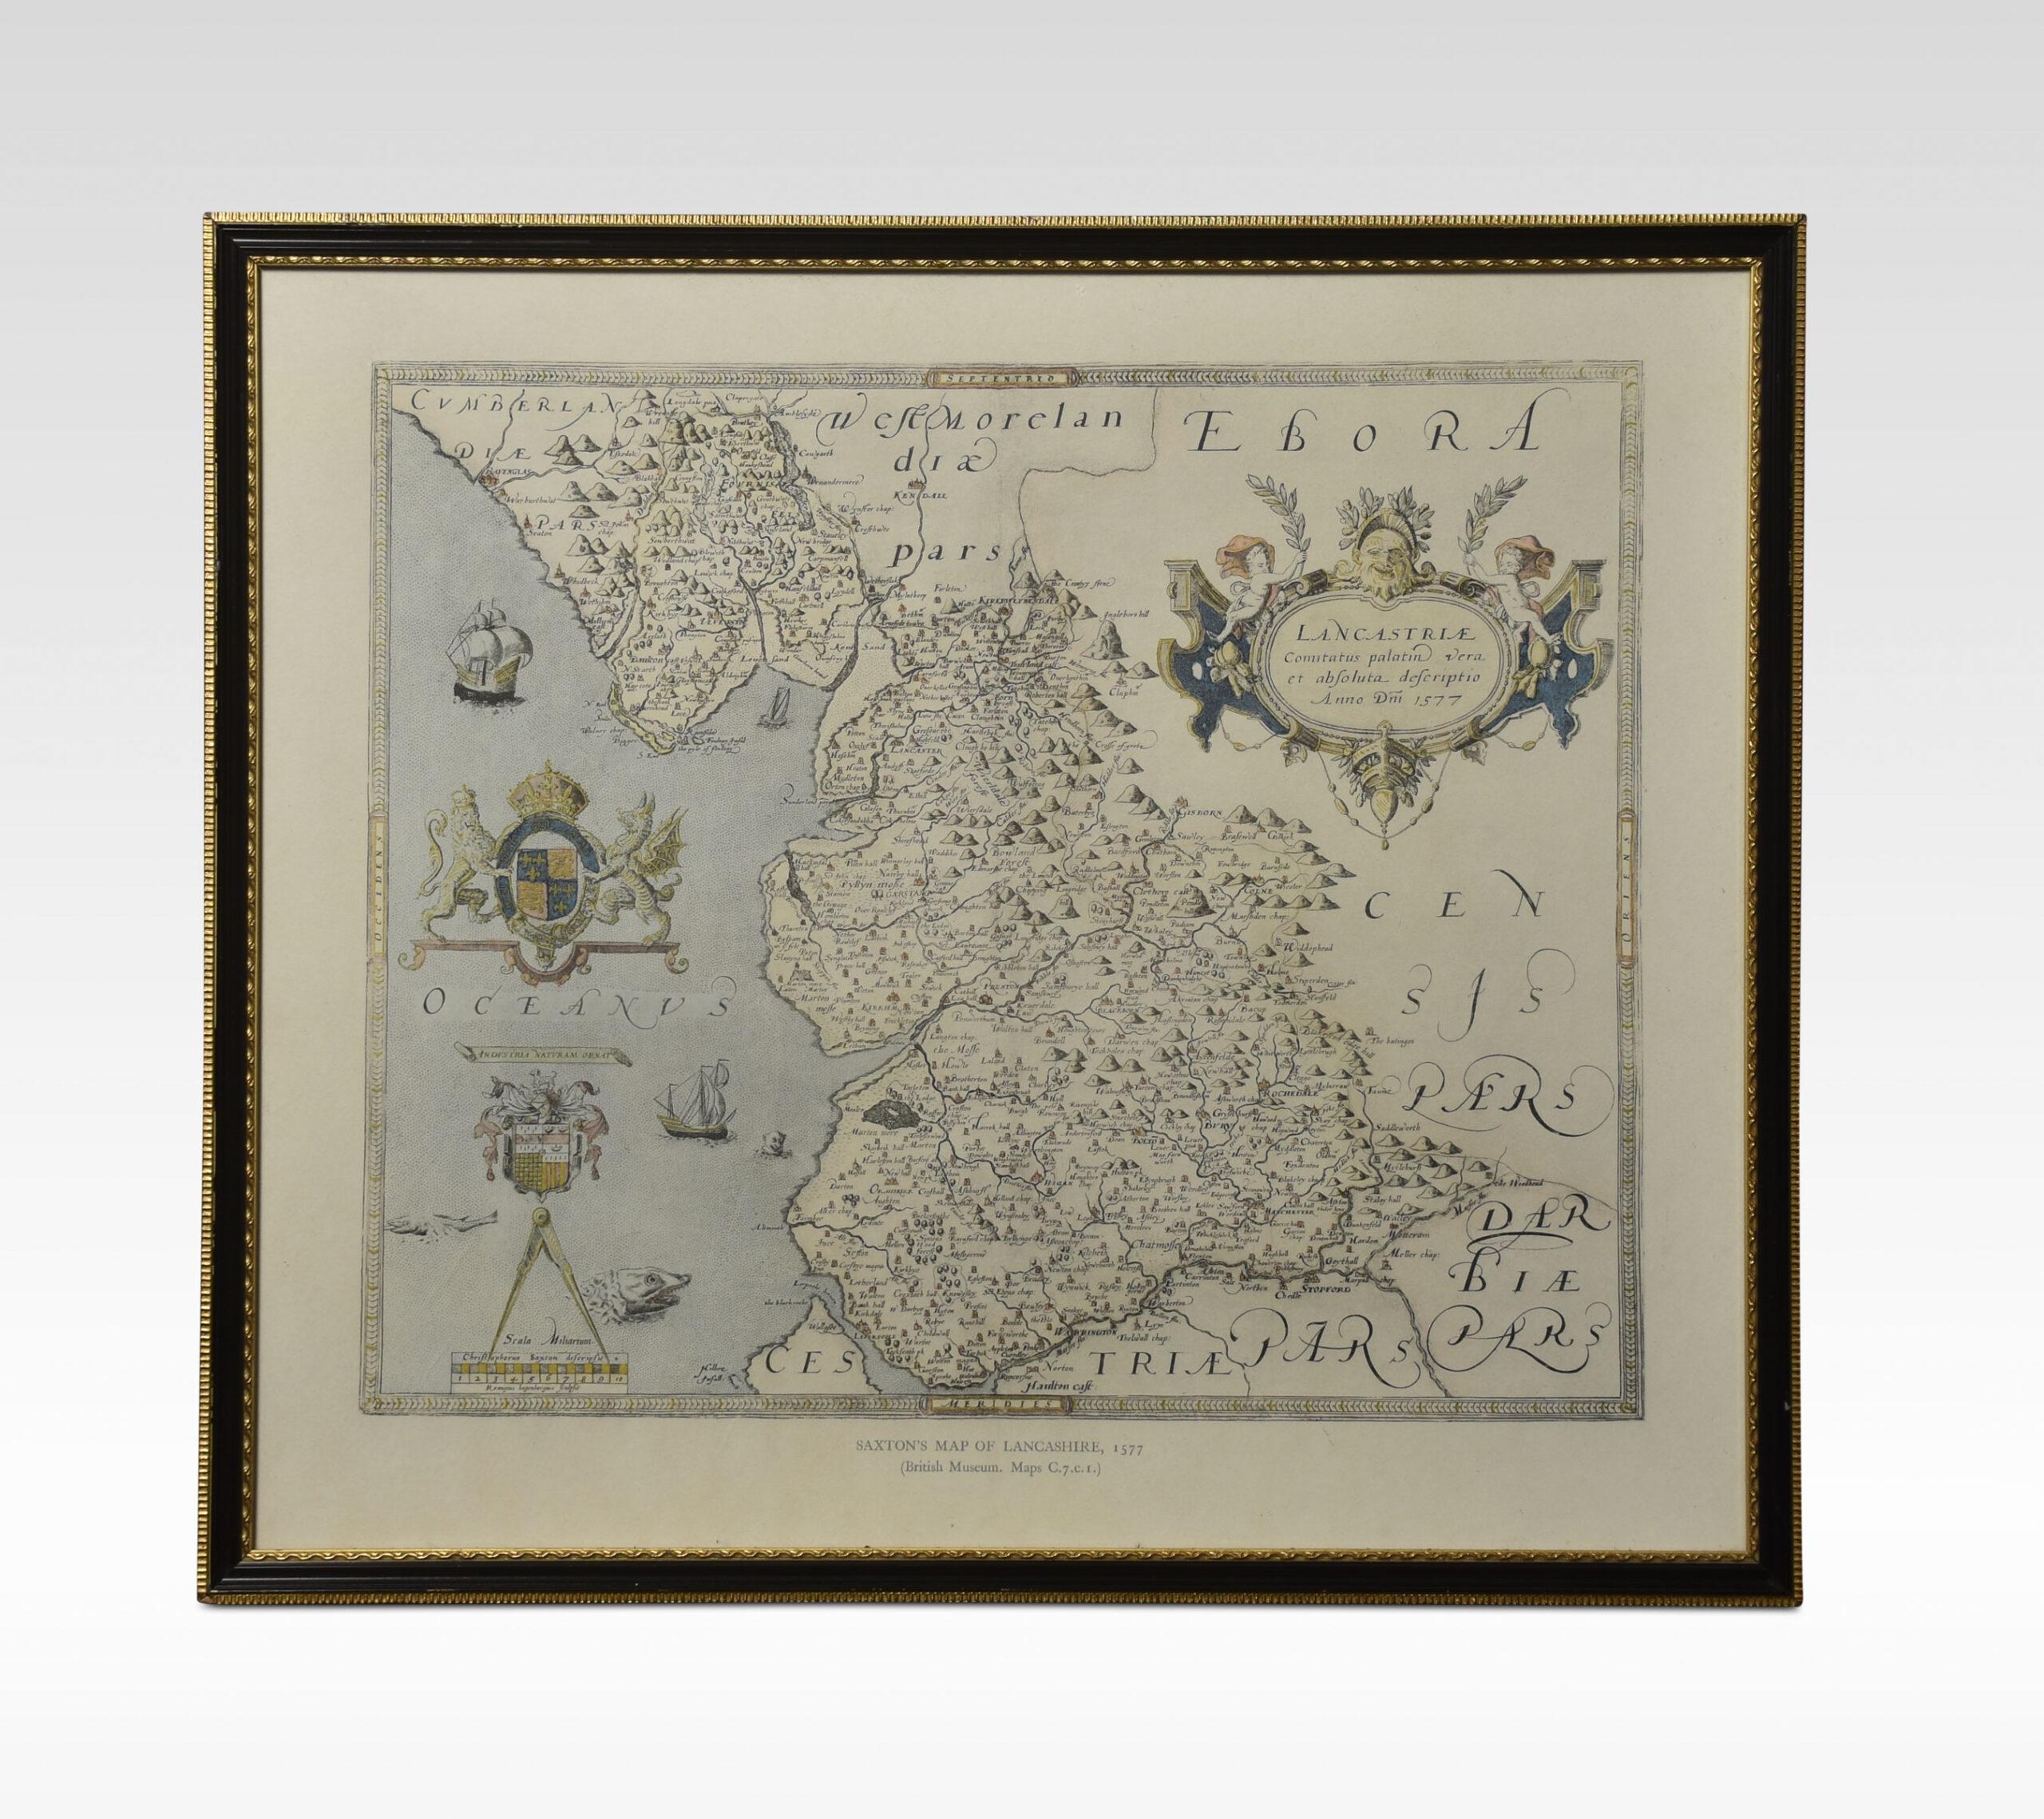 Saxton Map of Lancashire hand coloured. Encased in an ebonised frame.
Dimensions
Height 21 Inches
Width 24 Inches
Depth 1 Inches